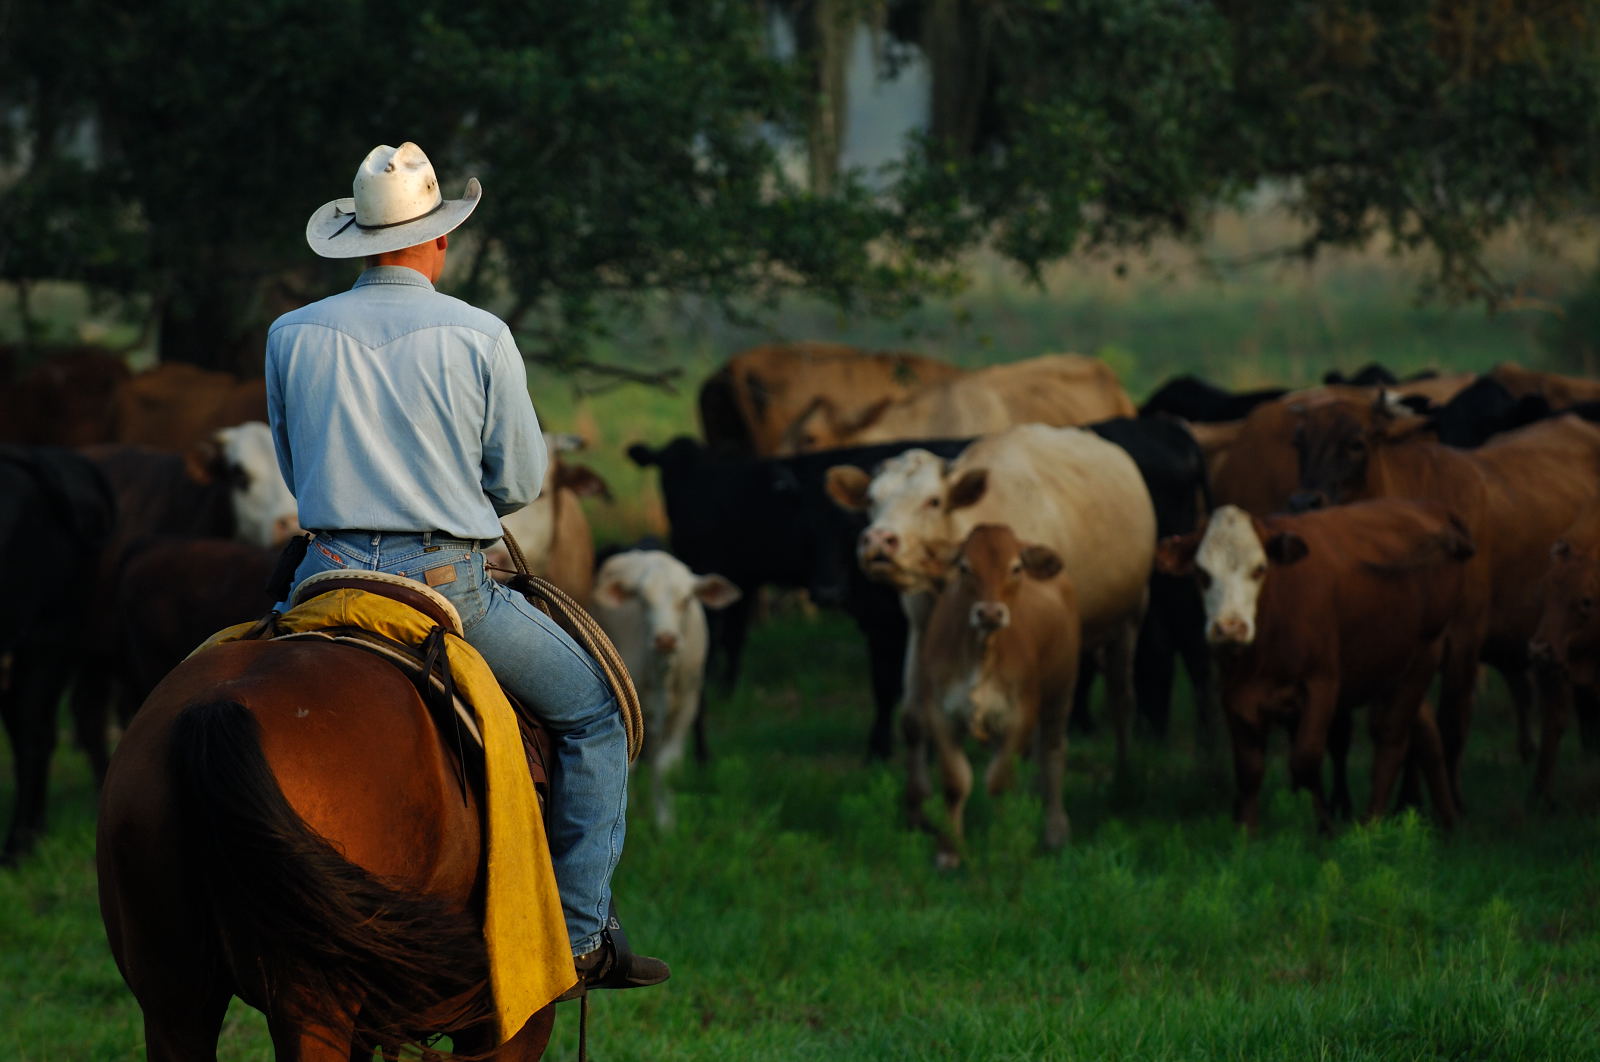 New Sales Tax Exemptions for Florida Ranchers on Fencing and Trailers